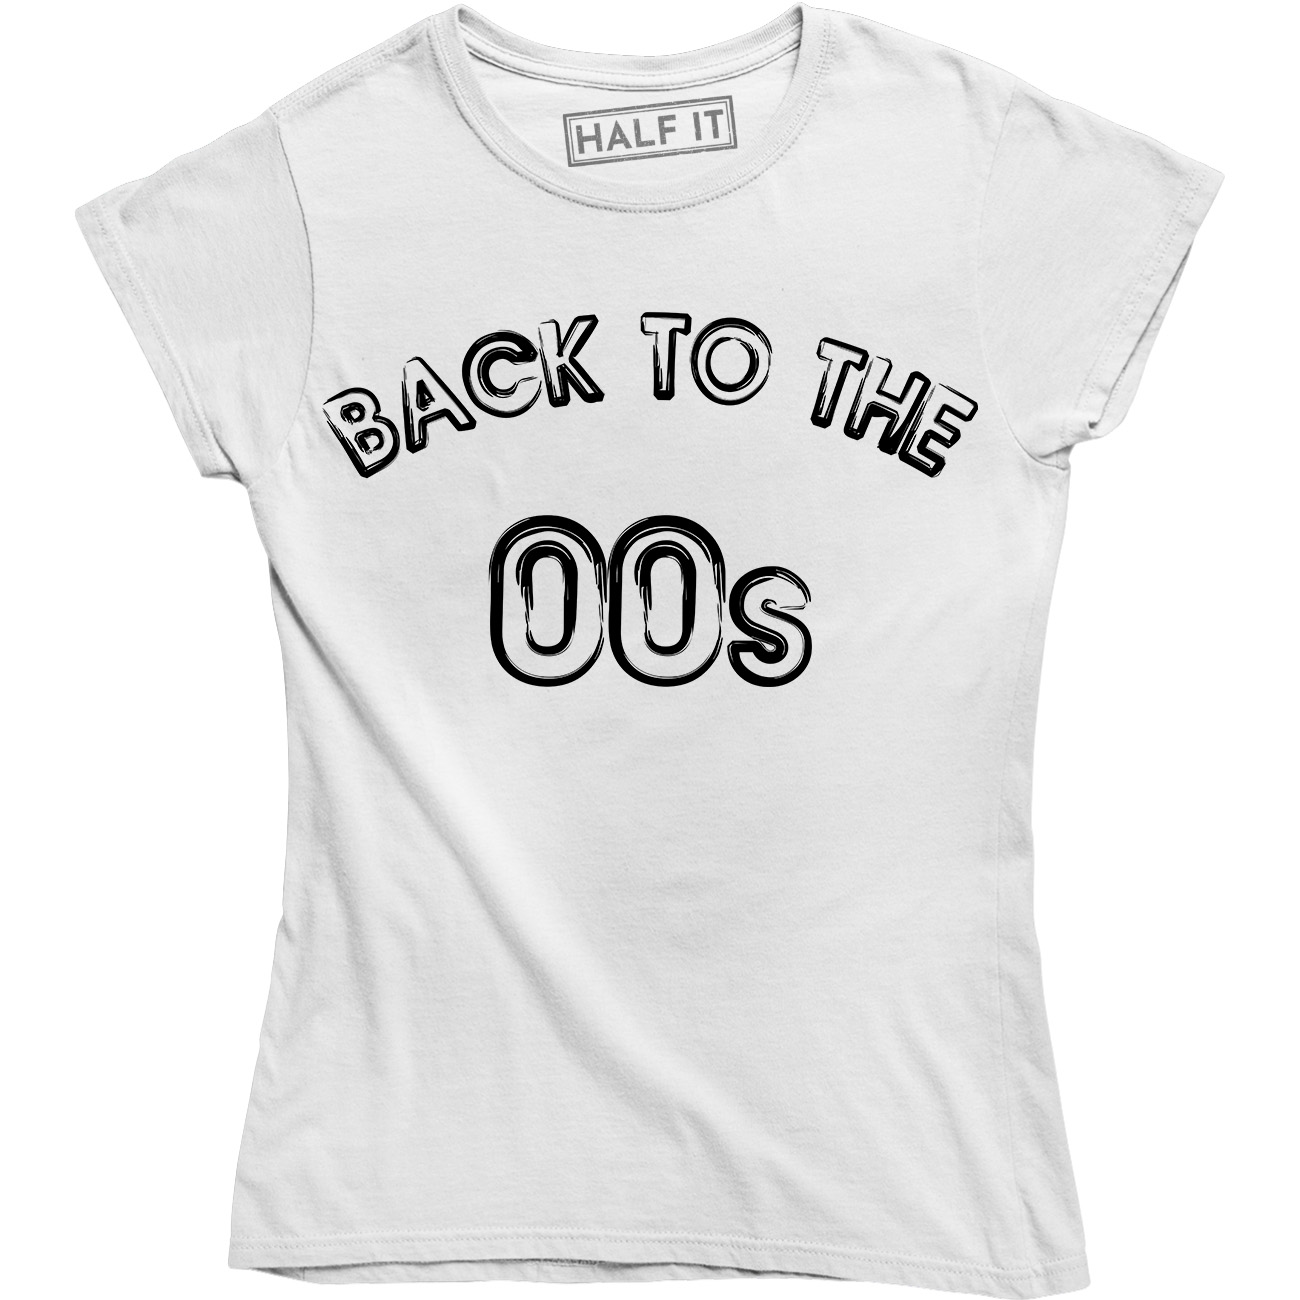 Womens BACK TO THE 00s Funny Noughties Millennial Weekend Music 2000s T-Shirt - image 1 of 4